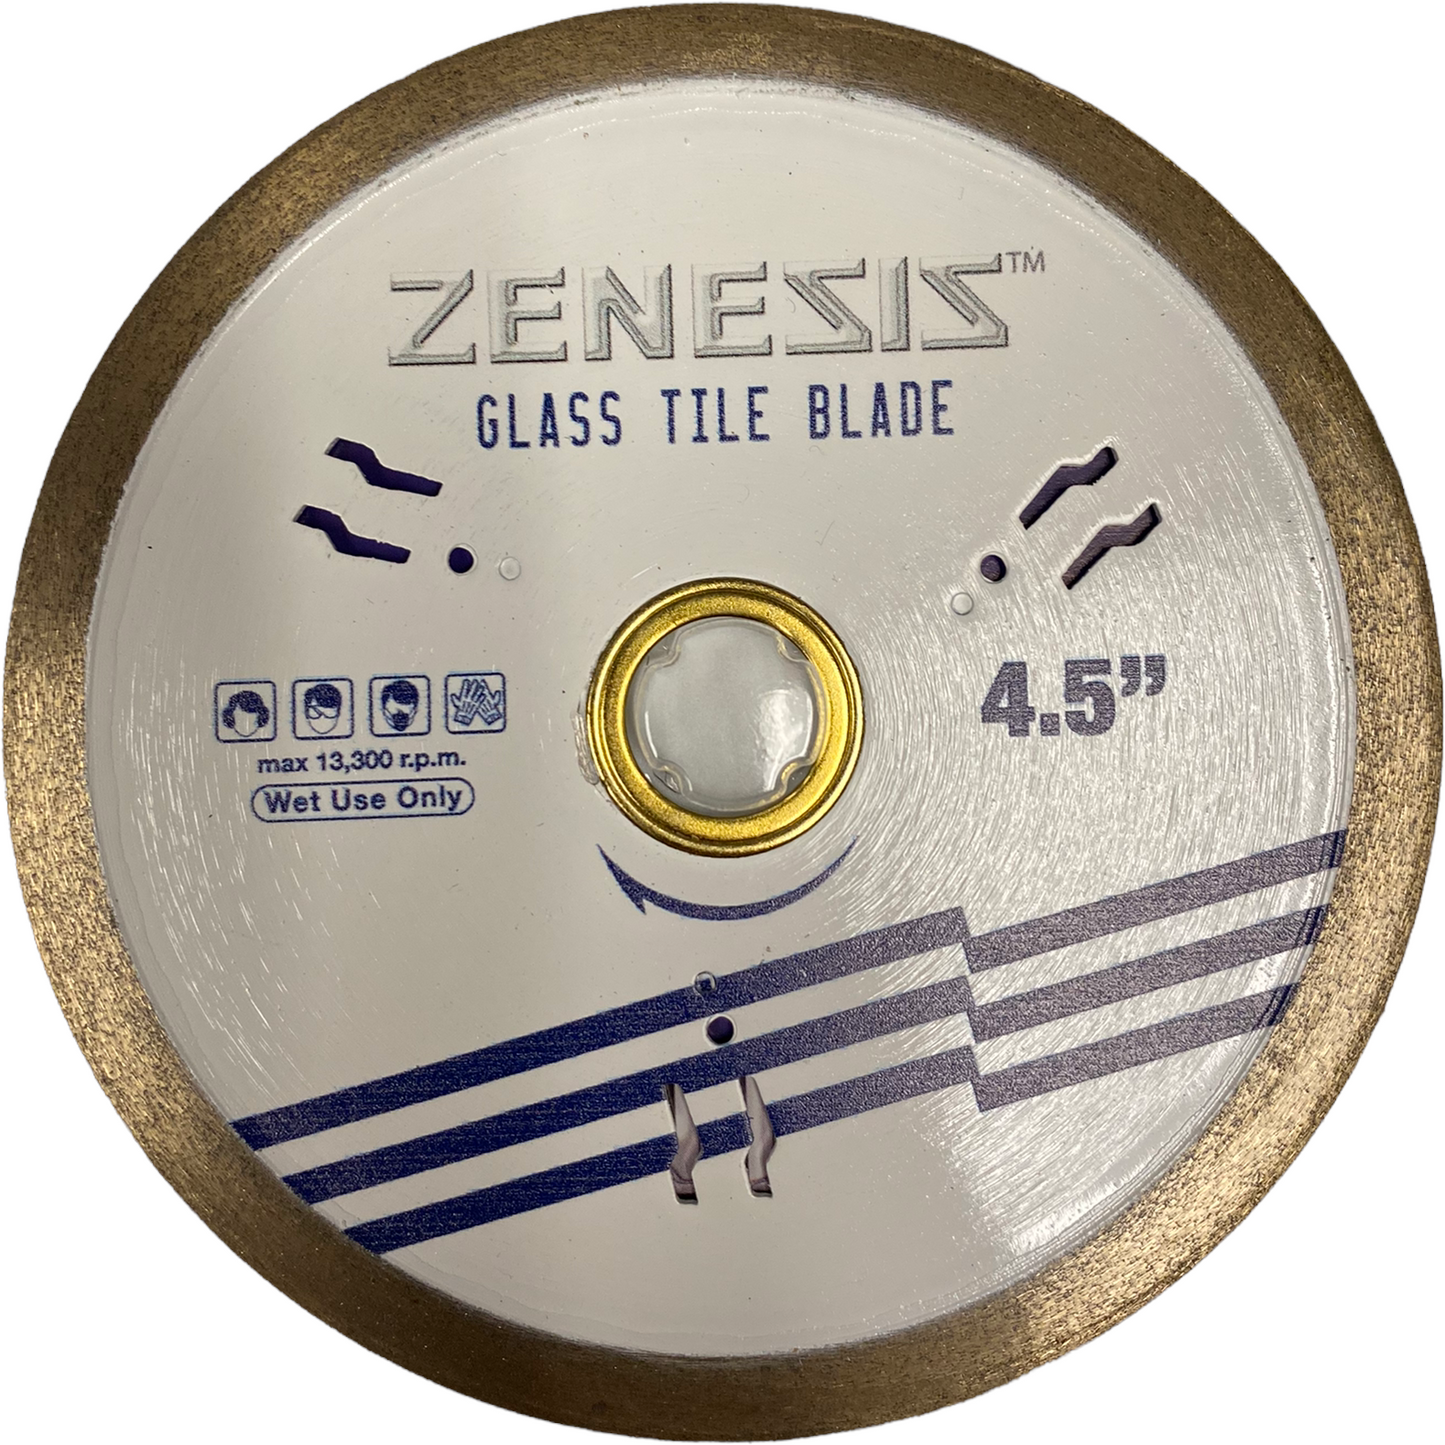 4.5” Zenesis Glass Tile Blade Fast Chip Free Cuts Continuous Rim